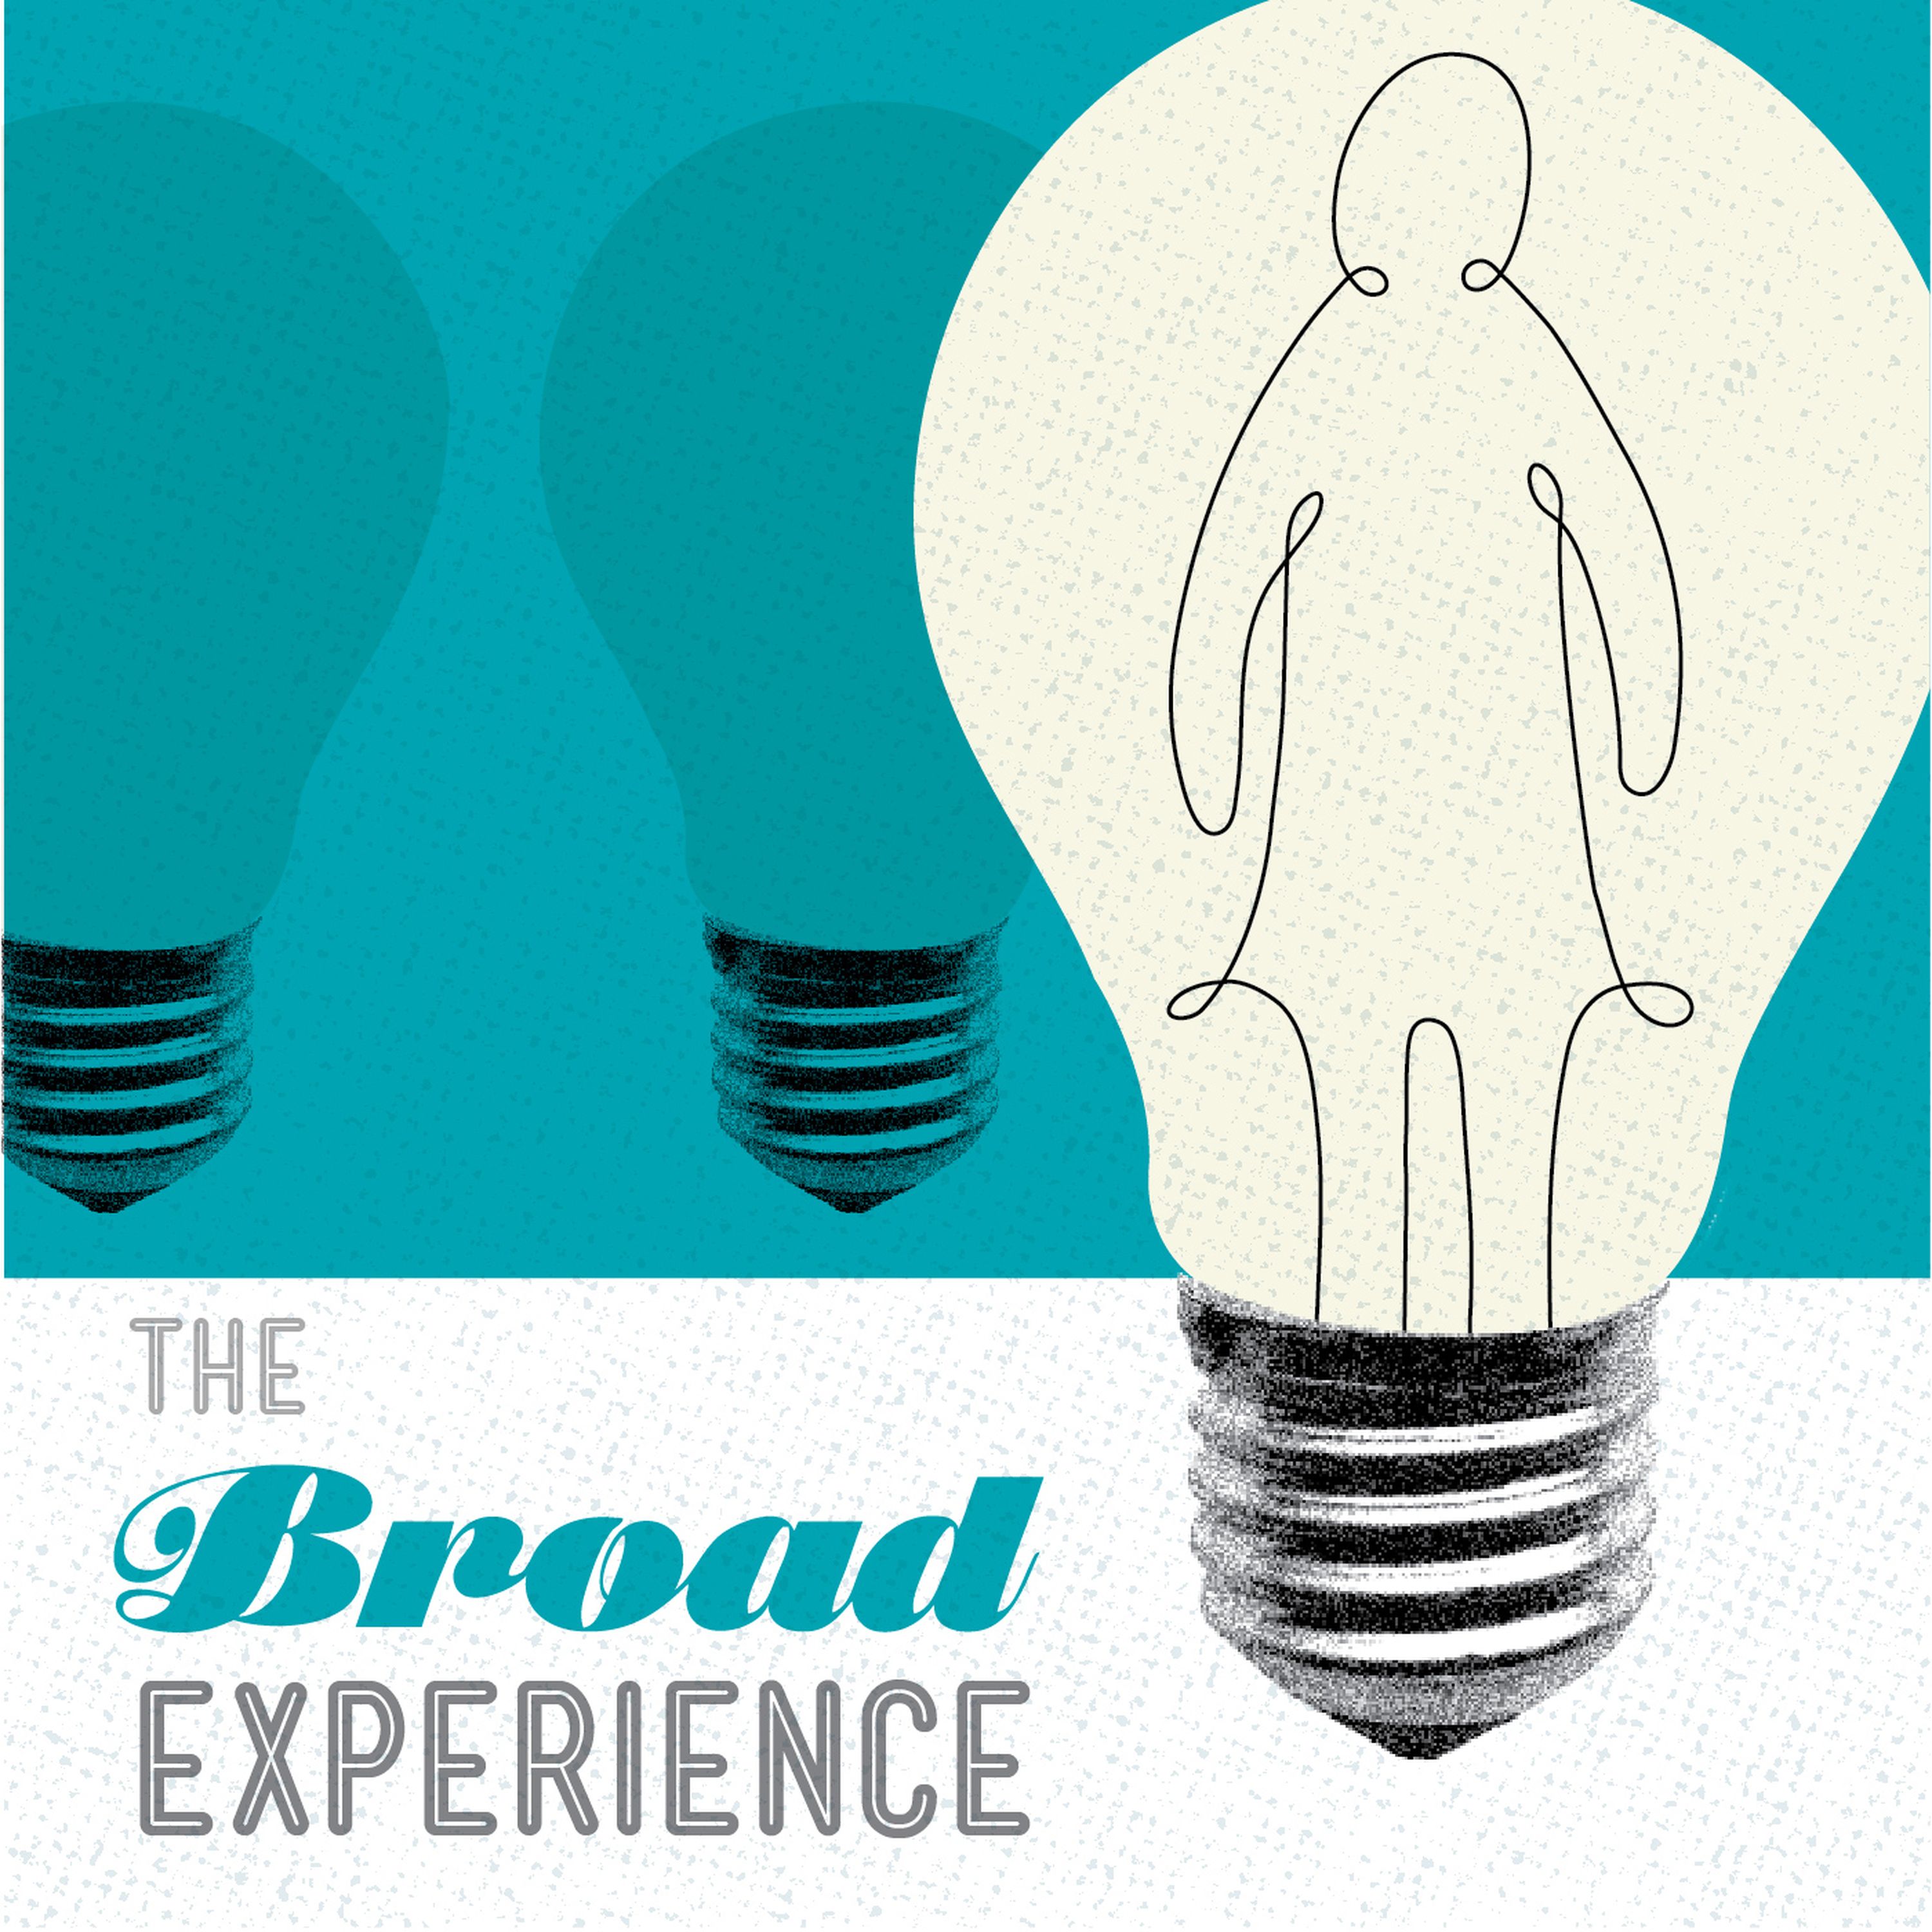 The Broad Experience 10: selling stereotypes